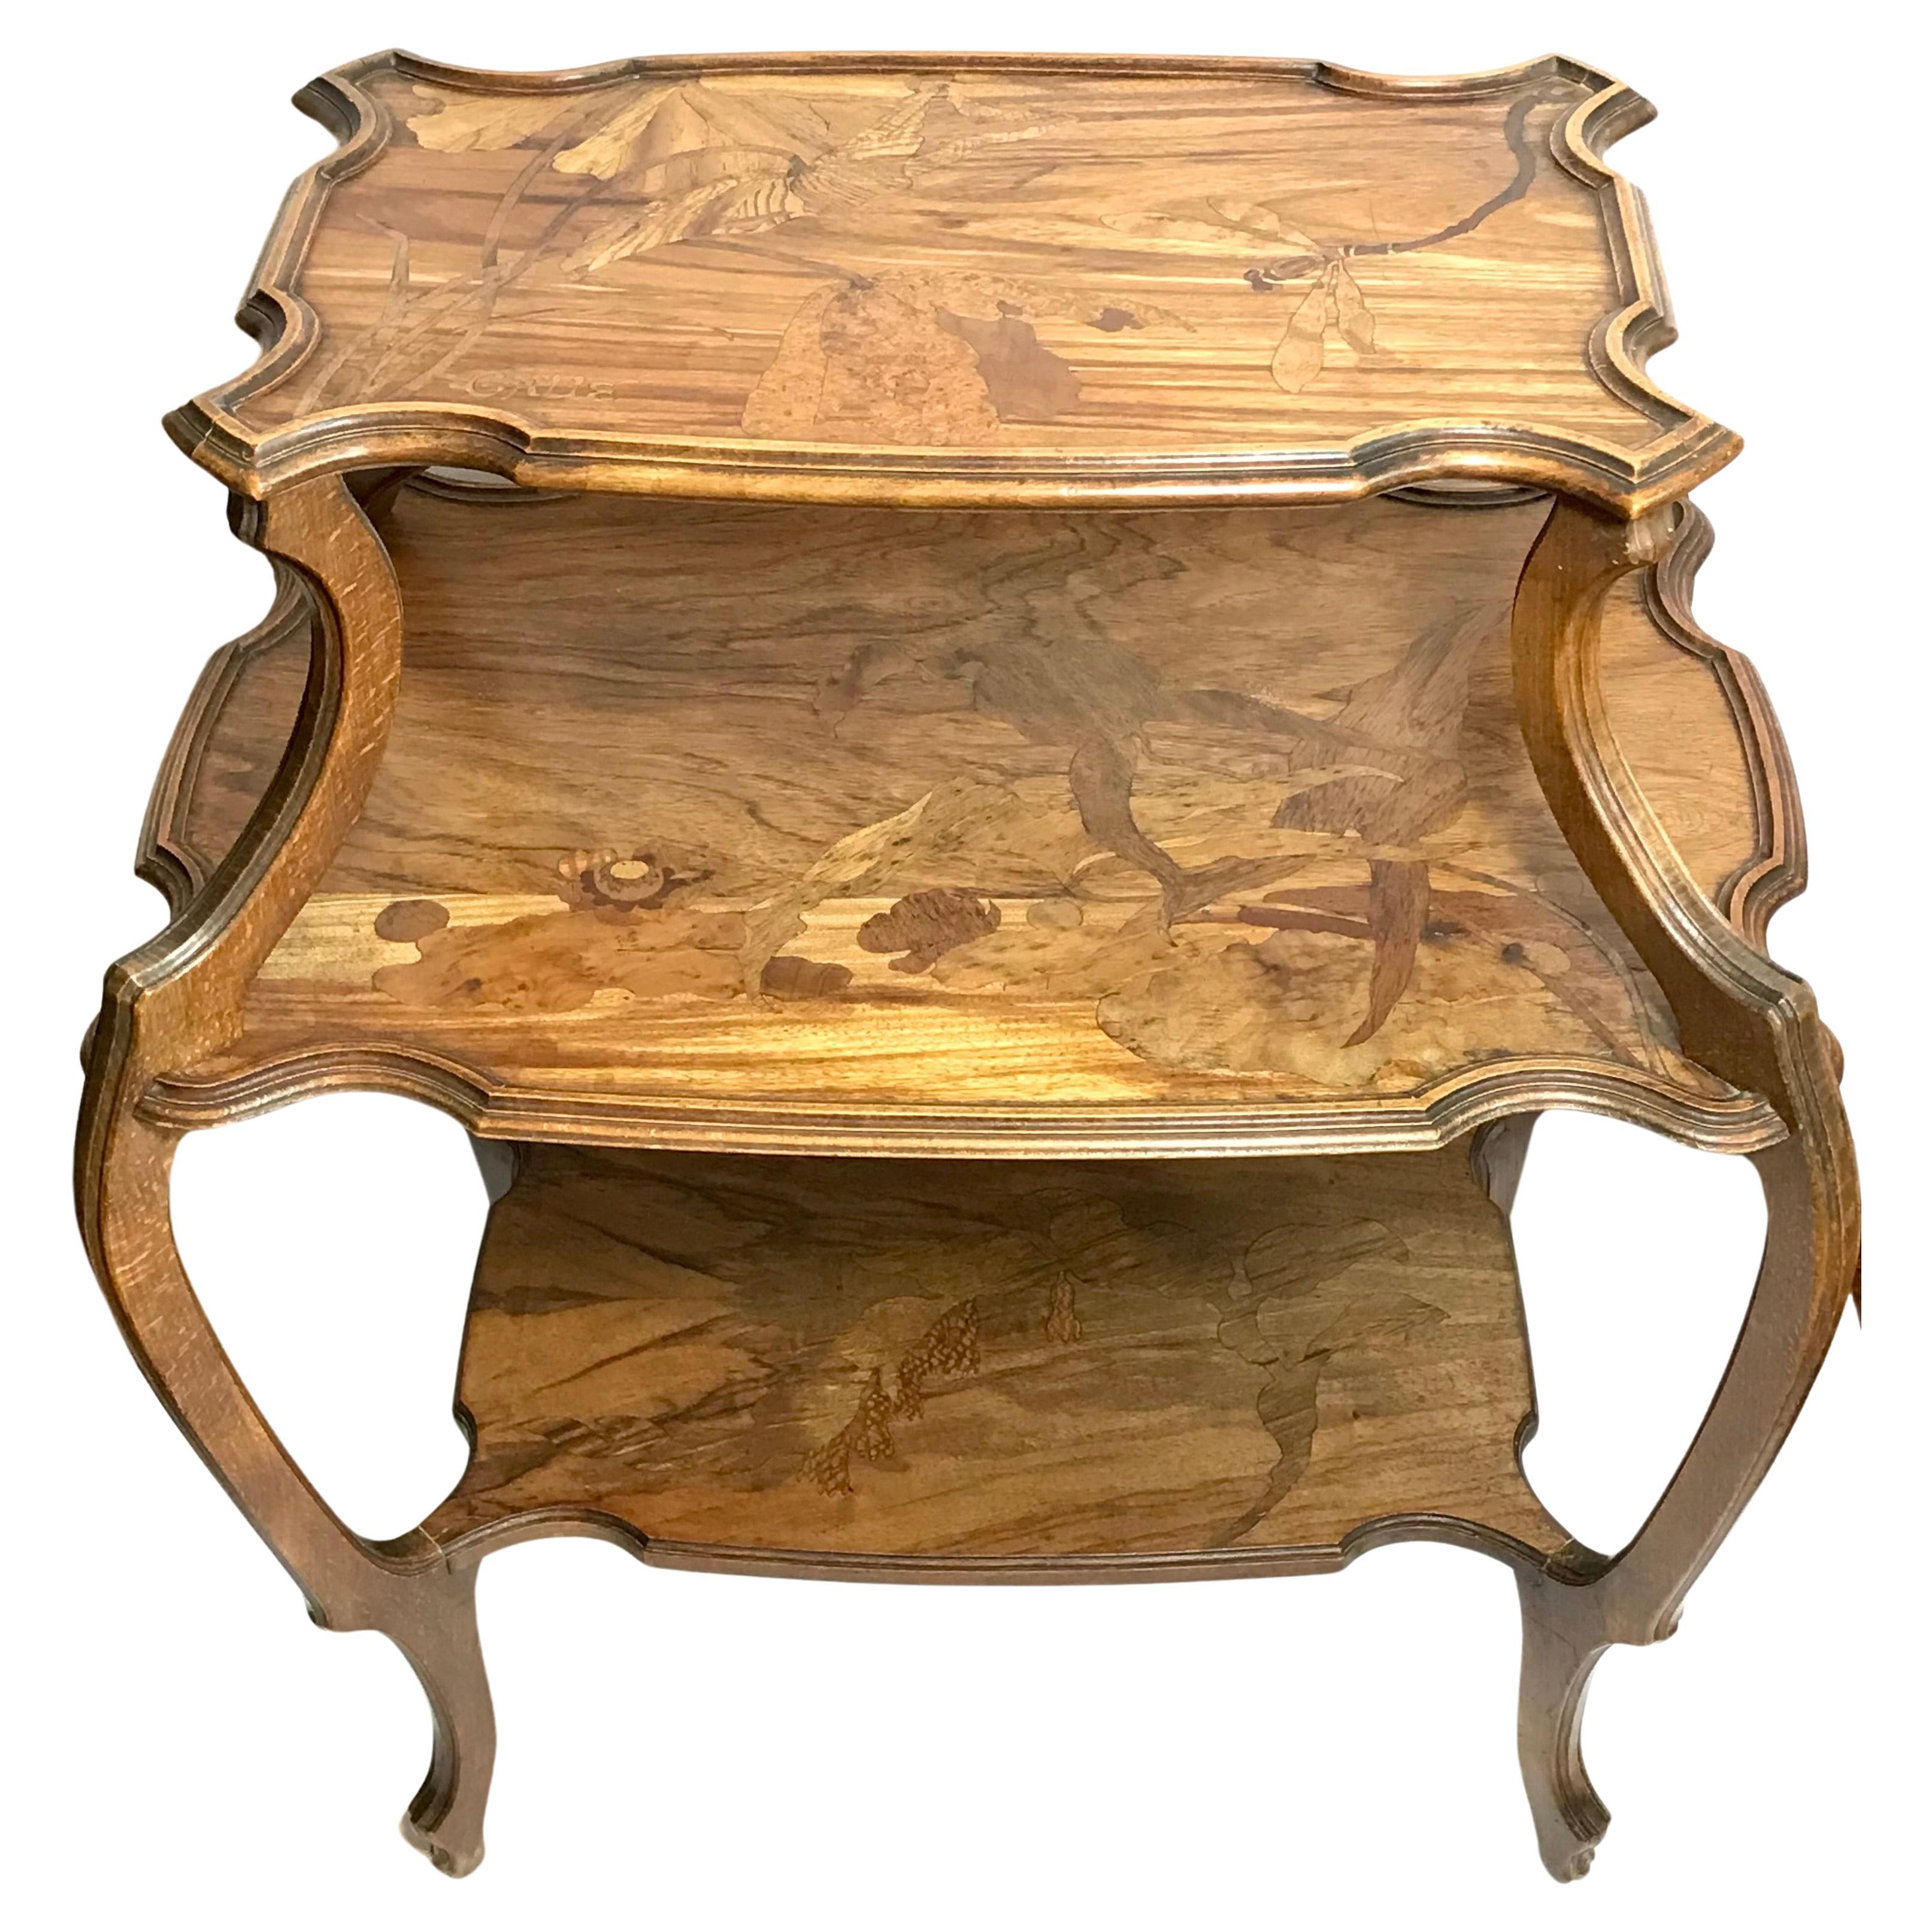 Emile Galle Marquetry Three Tier Dragonfy and Botanical Table For Sale